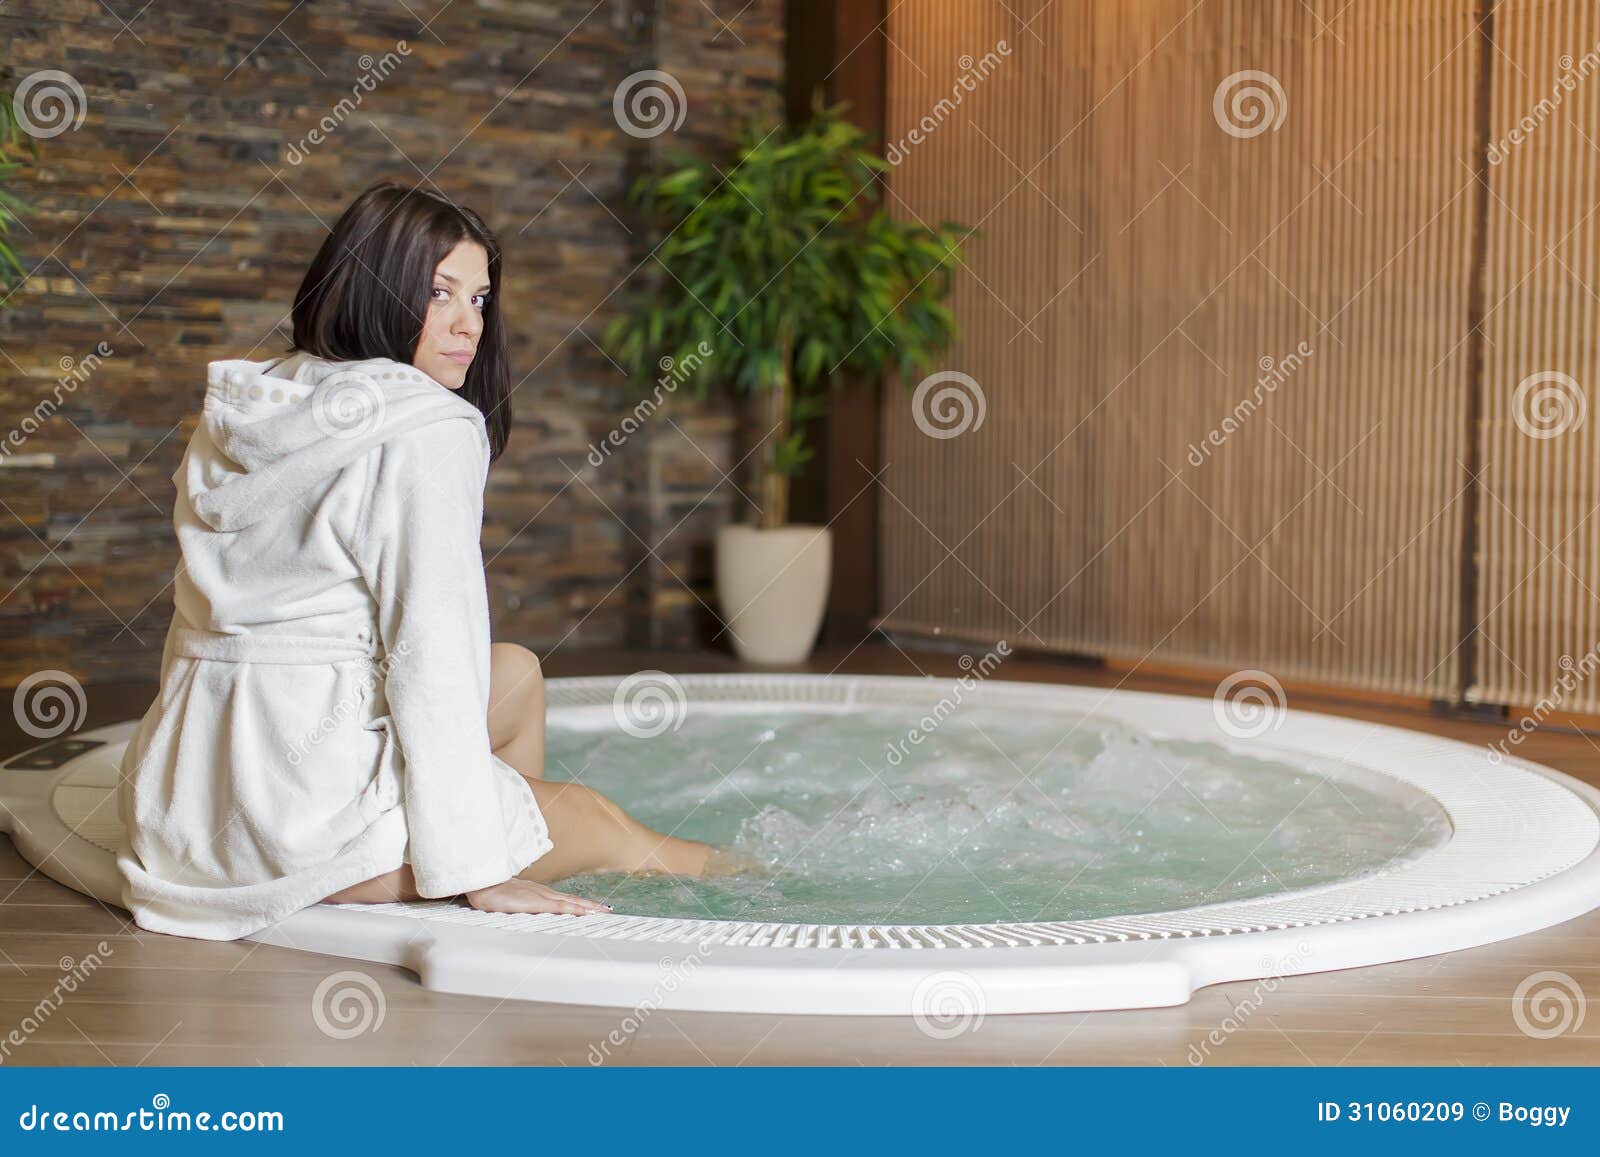 Young Woman In Hot Tub Stock Image Image Of Enjoyment 31060209